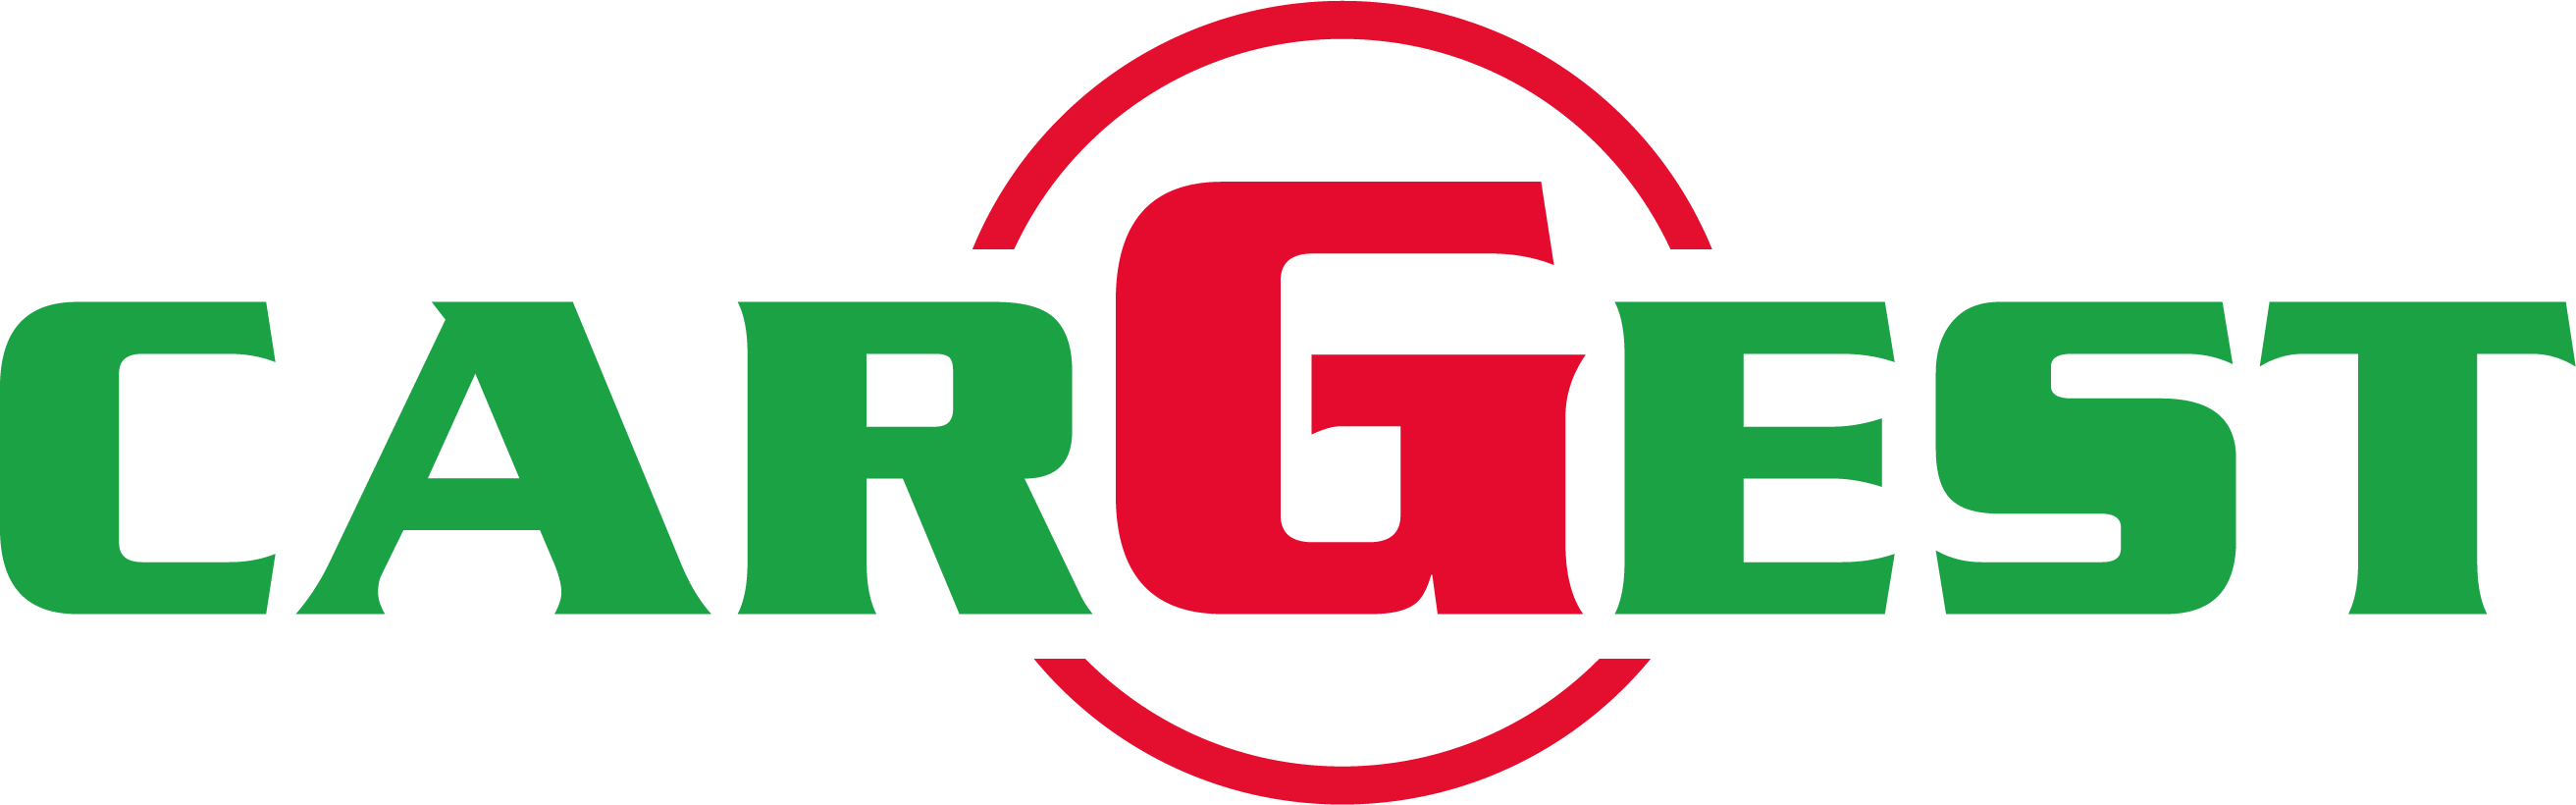 CarGest Logo